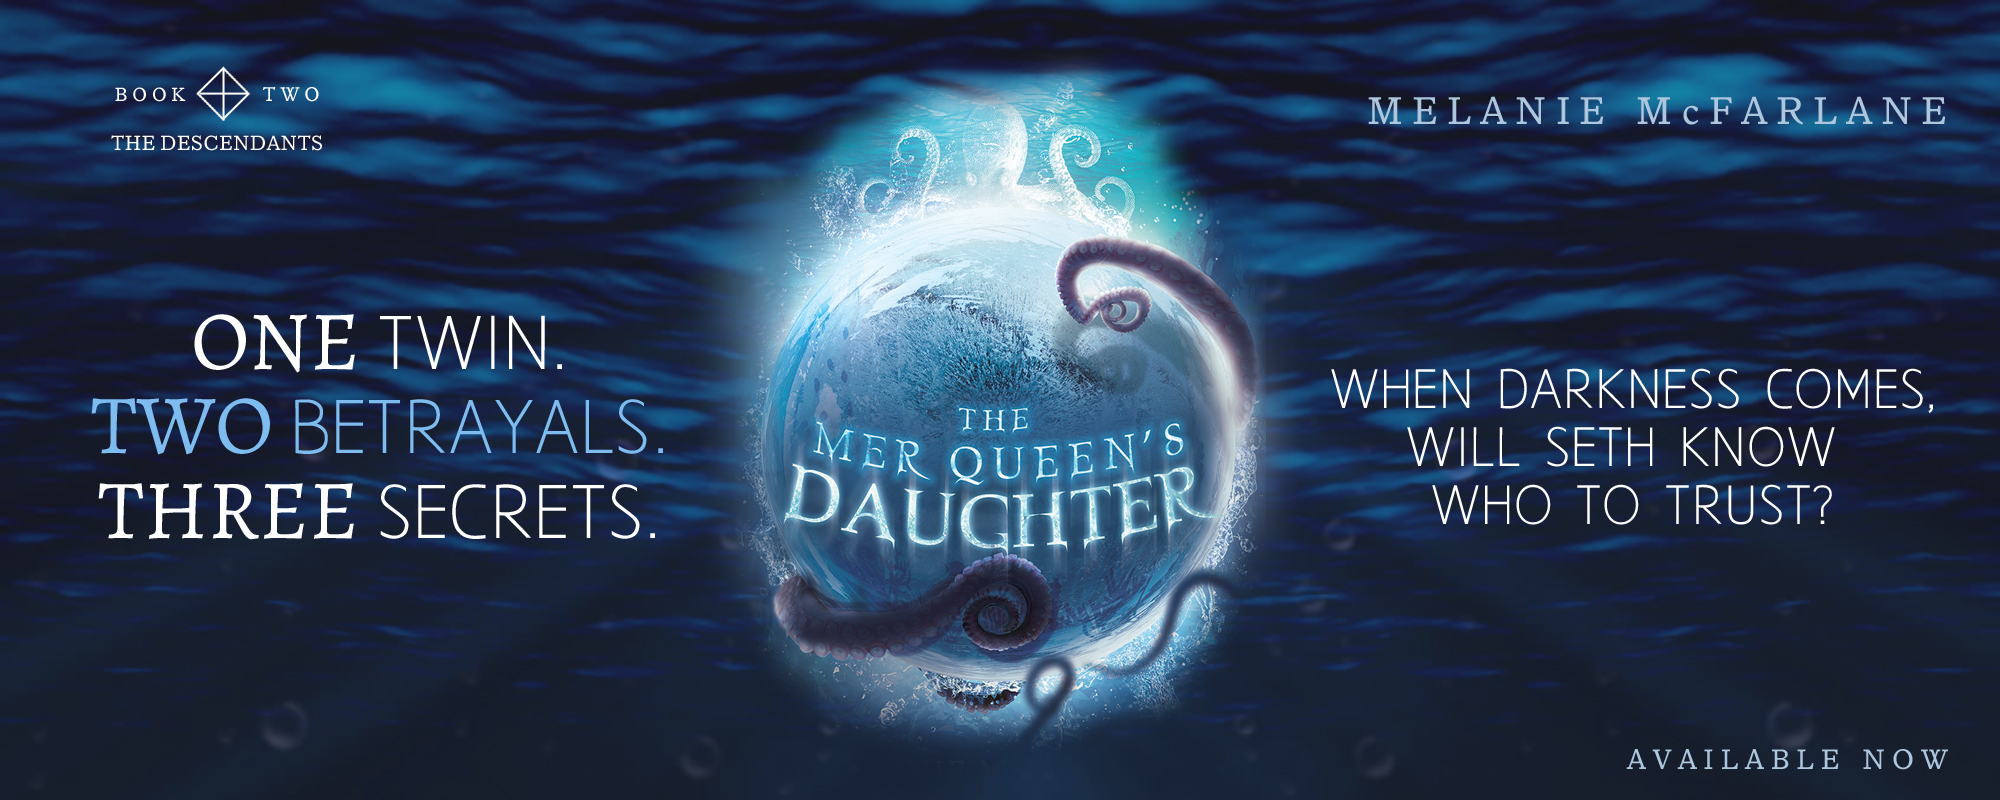 The Mer Queen's Daughter by Melanie McFarlane, available now